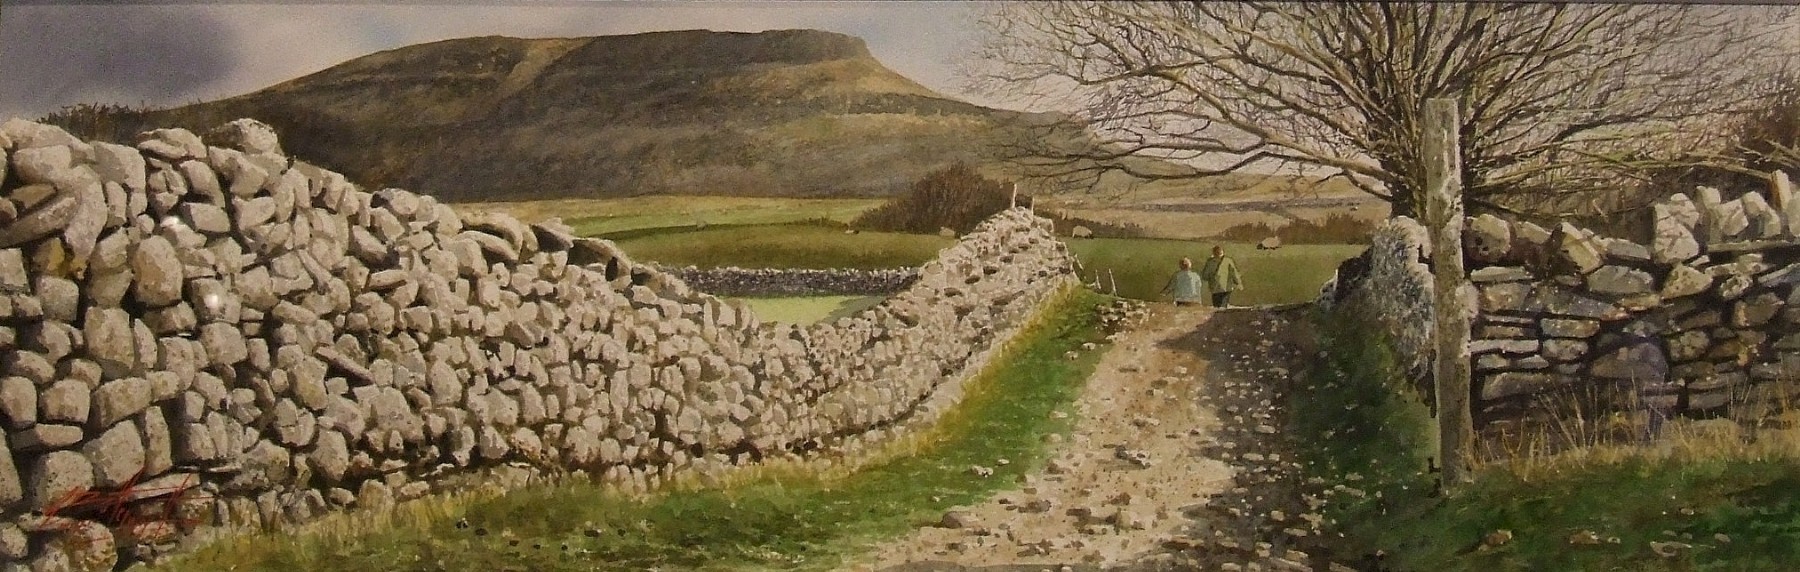  Into the Dales